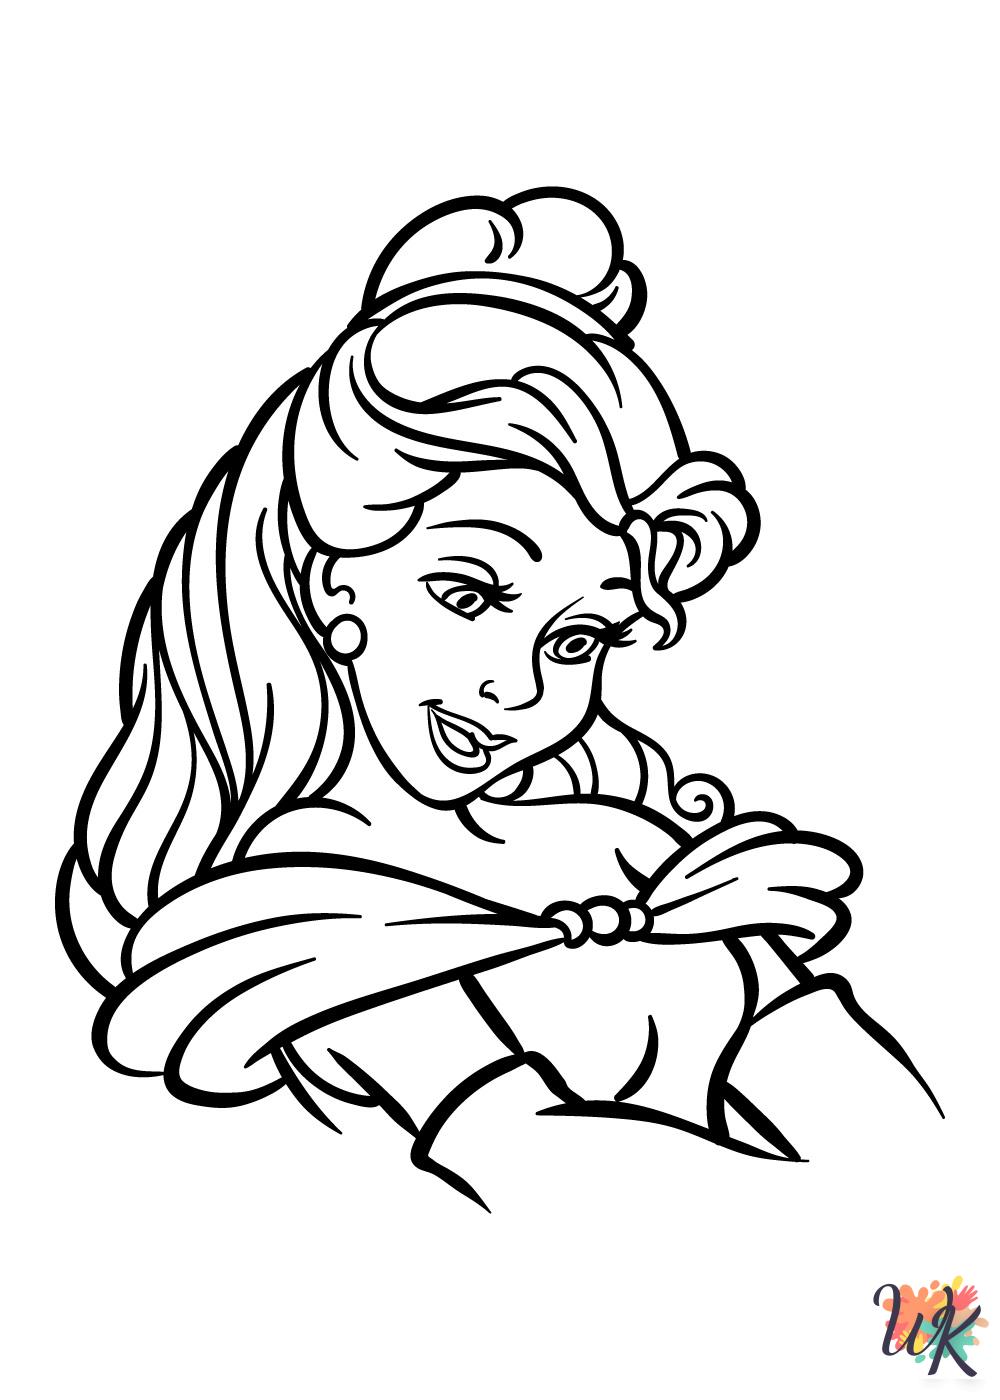 Belle coloring pages printable